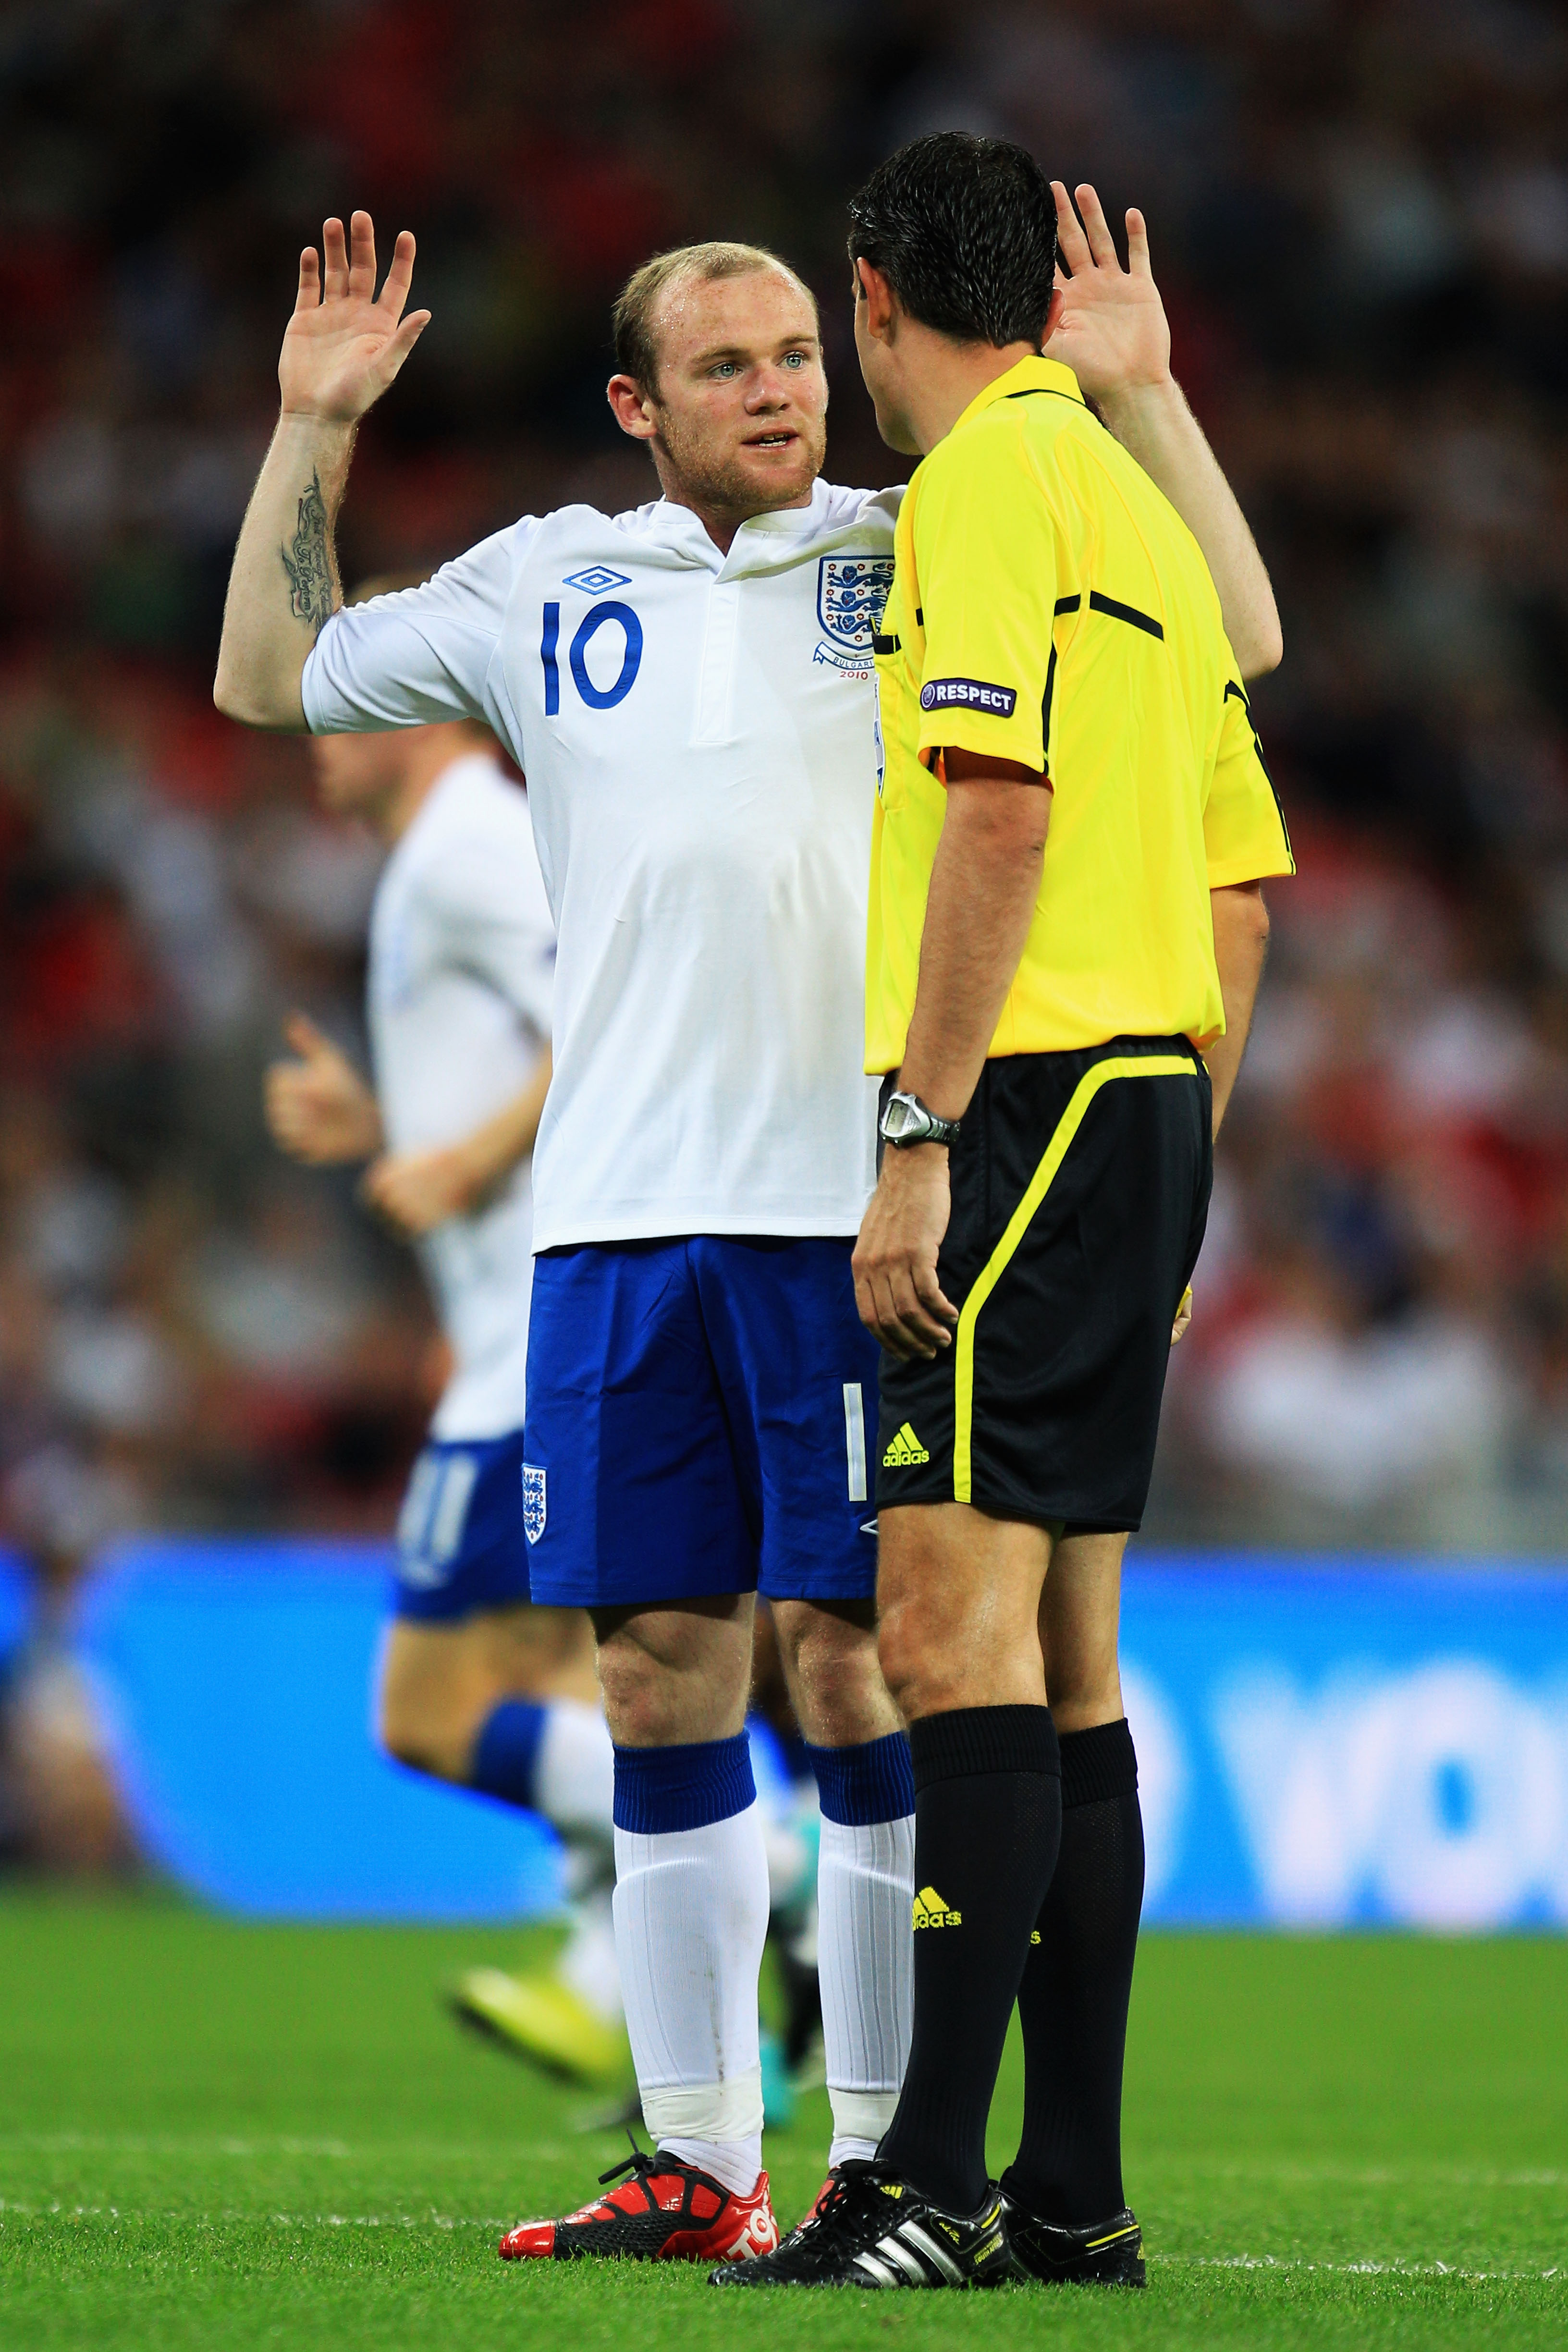 LONDON, ENGLAND - SEPTEMBER 03:  Wayne Rooney of England appeals to match referee Viktor Kassai of Hungary during the UEFA EURO 2012 Group G Qualifying match between England and Bulgaria at Wembley Stadium on September 3, 2010 in London, England.  (Photo